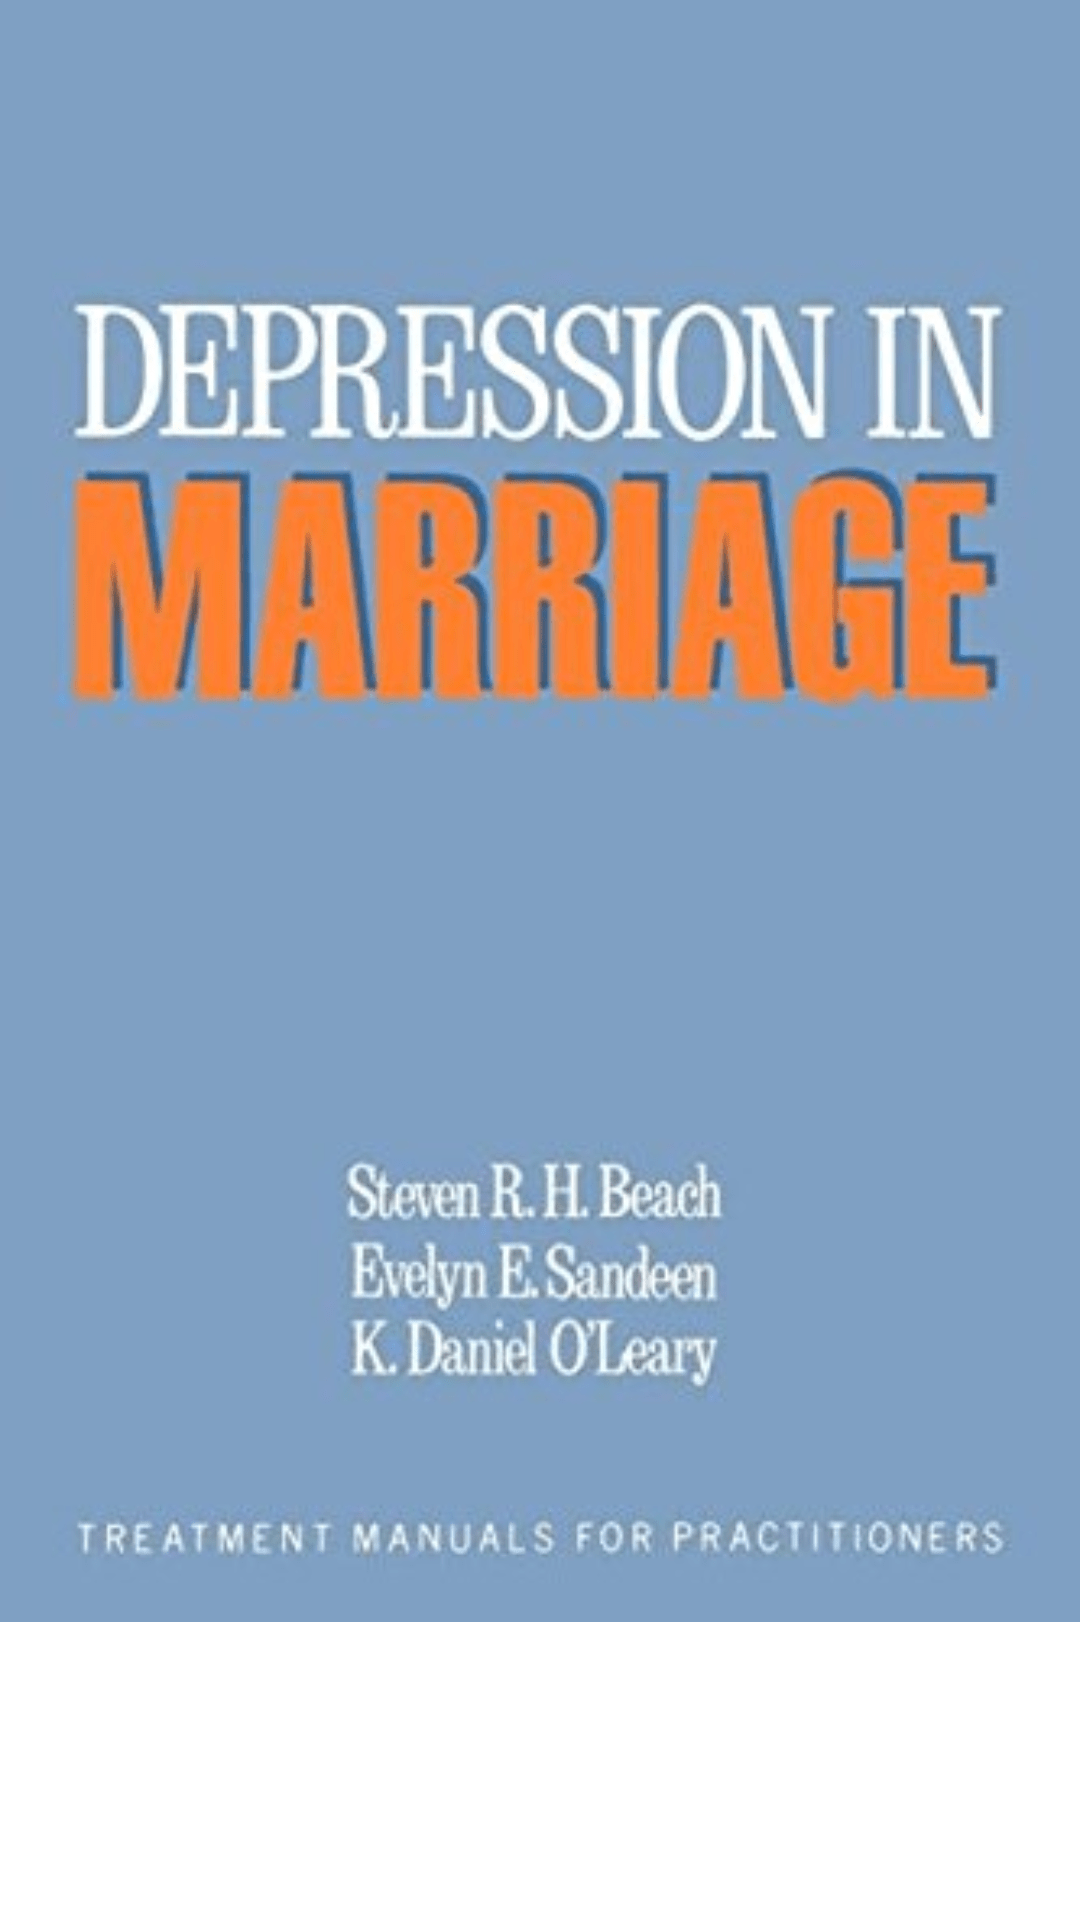 Depression in Marriage: A Model for Etiology and Treatment